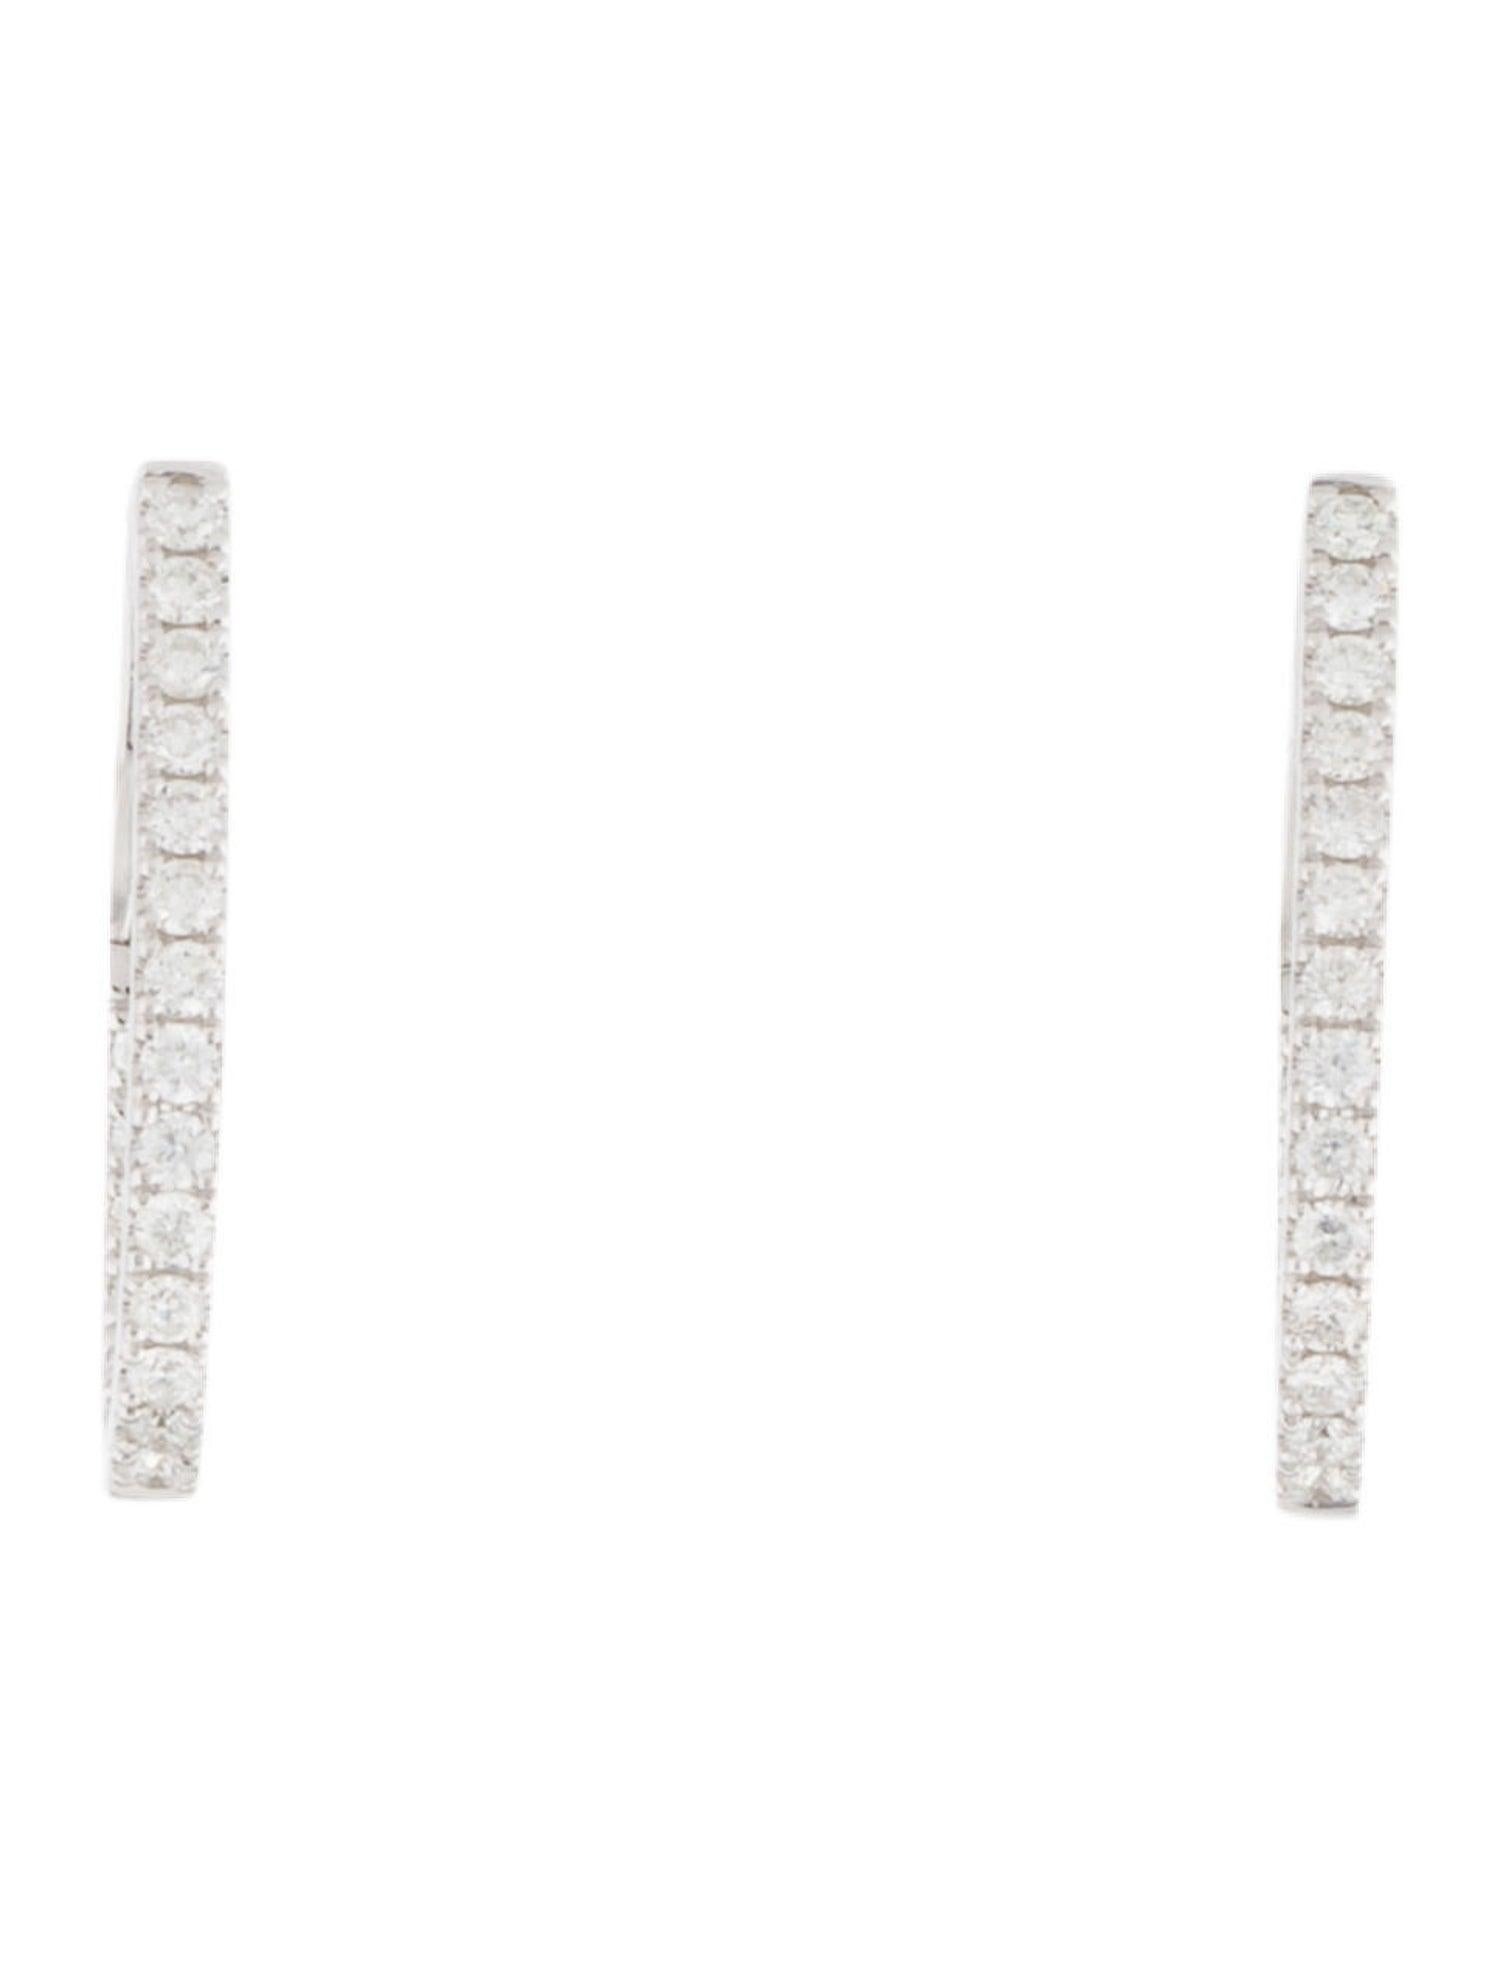 Quality Diamond Hoops: Made from real 14k gold and 44 glittering natural white approximately 0.65 ct. Certified diamonds, featuring a single row of white diamonds on the inside and outside of the earrings with a color and clarity of GH-SI. Earring